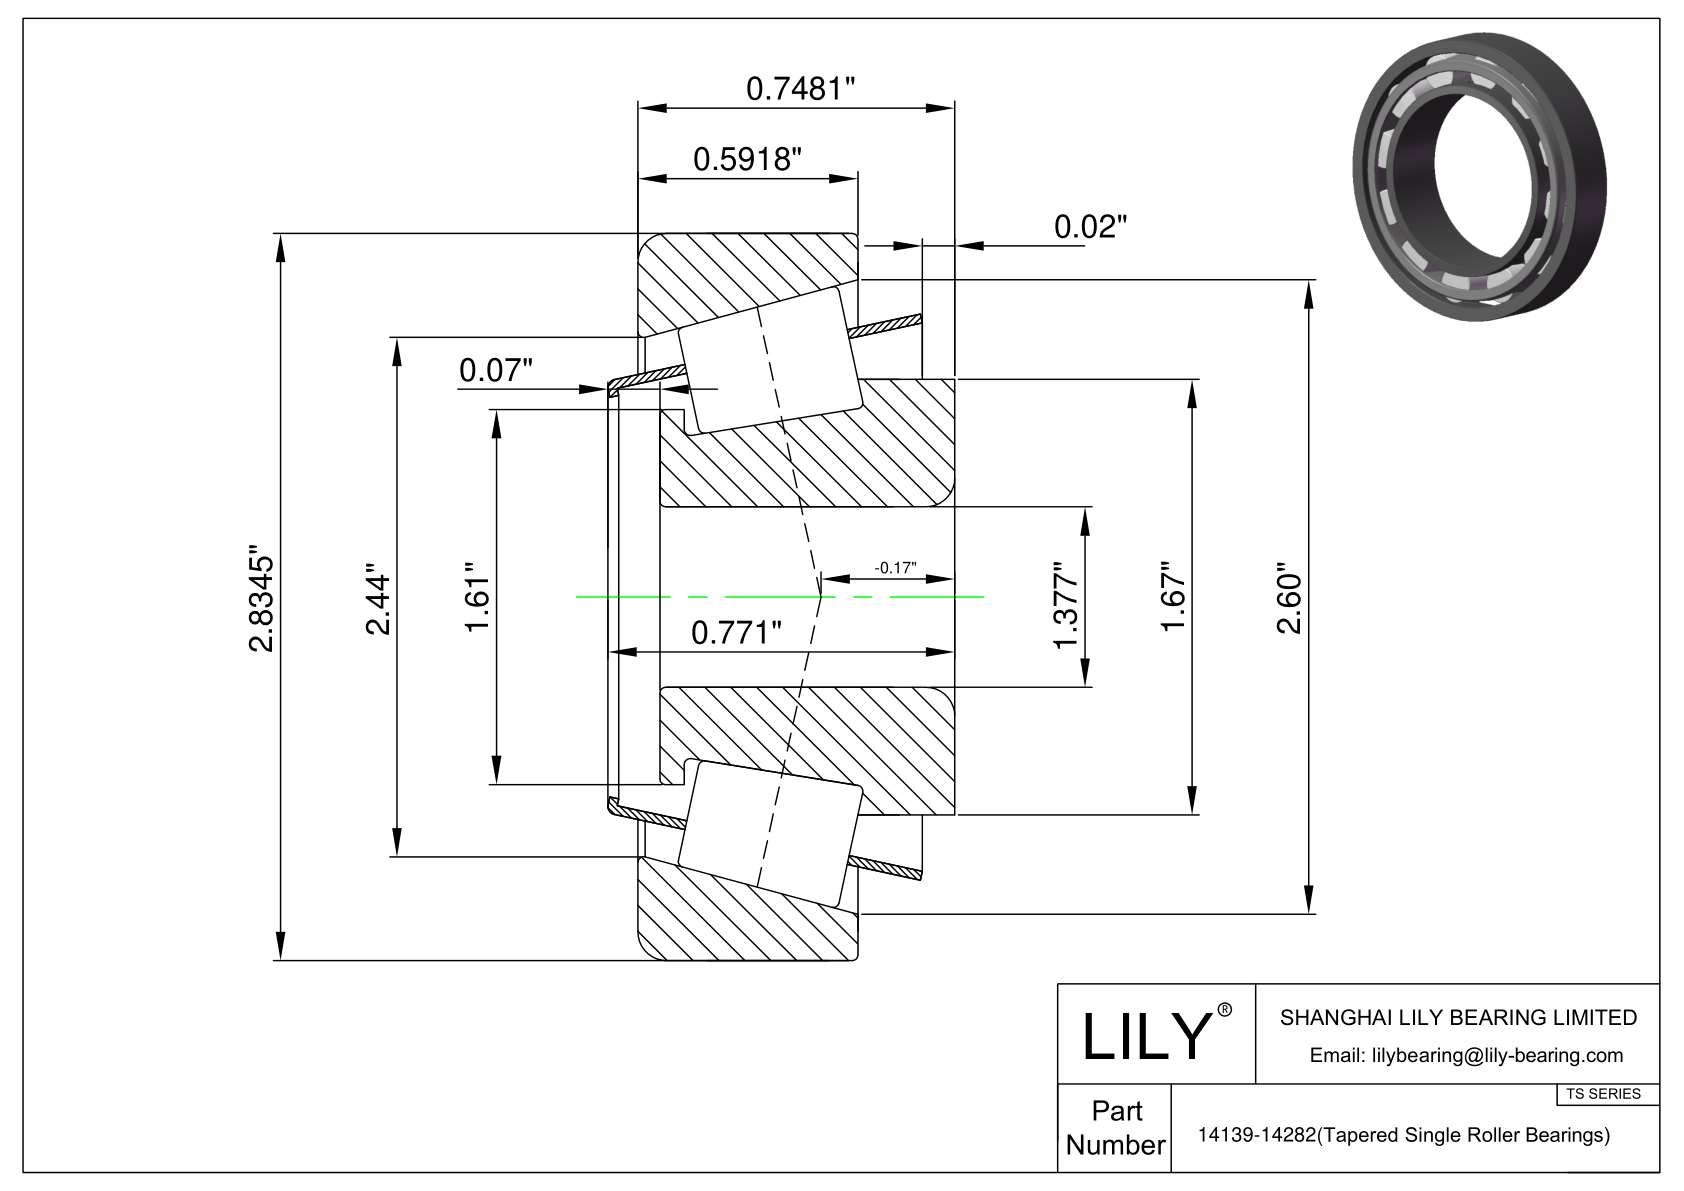 14139-14282 TS (Tapered Single Roller Bearings) (Imperial) cad drawing